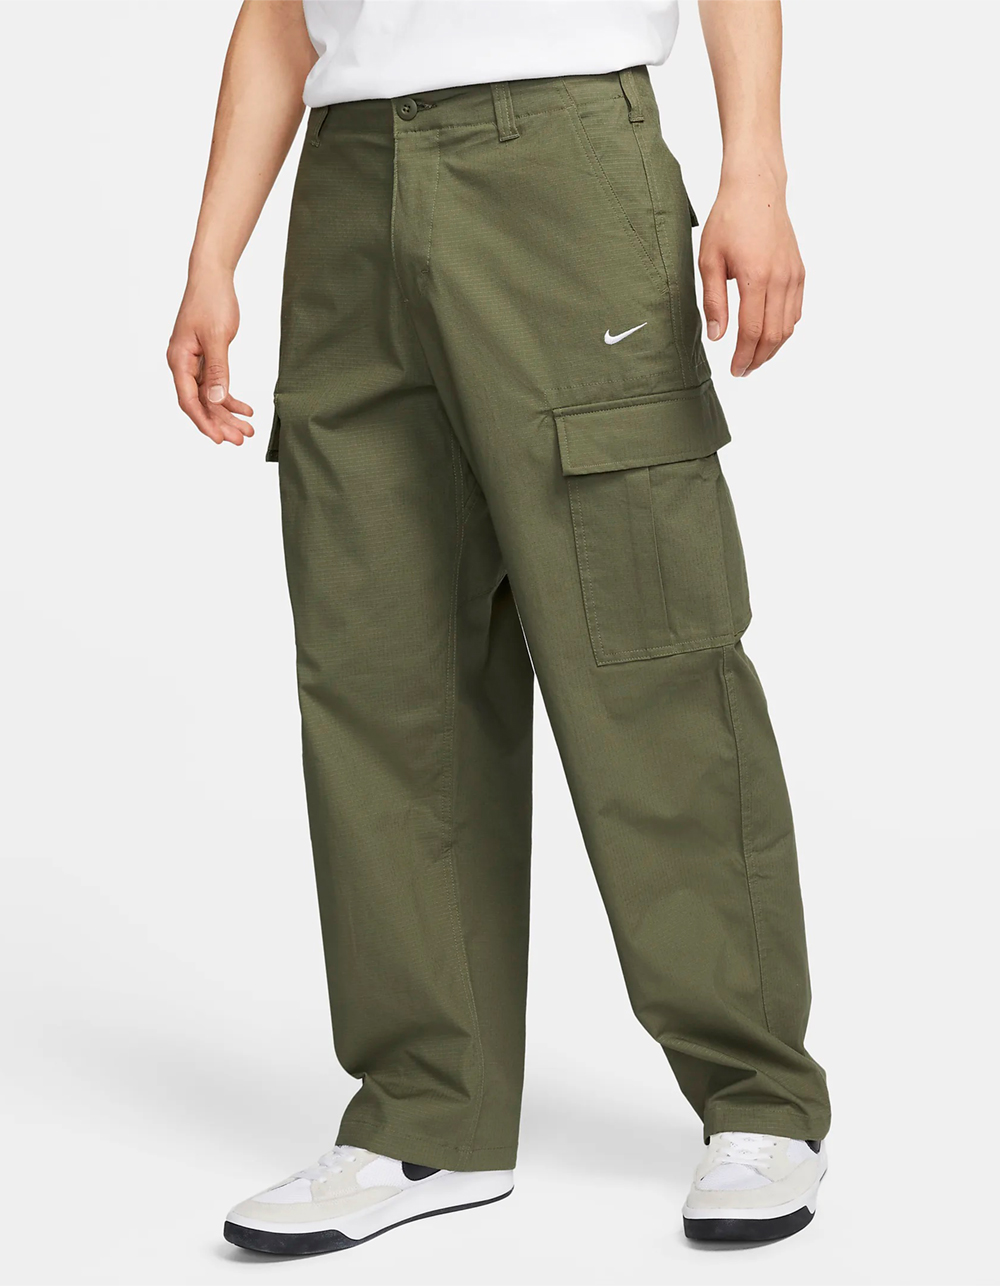 Nike Taped Poly Pants - Black / Sail | Always in Colour